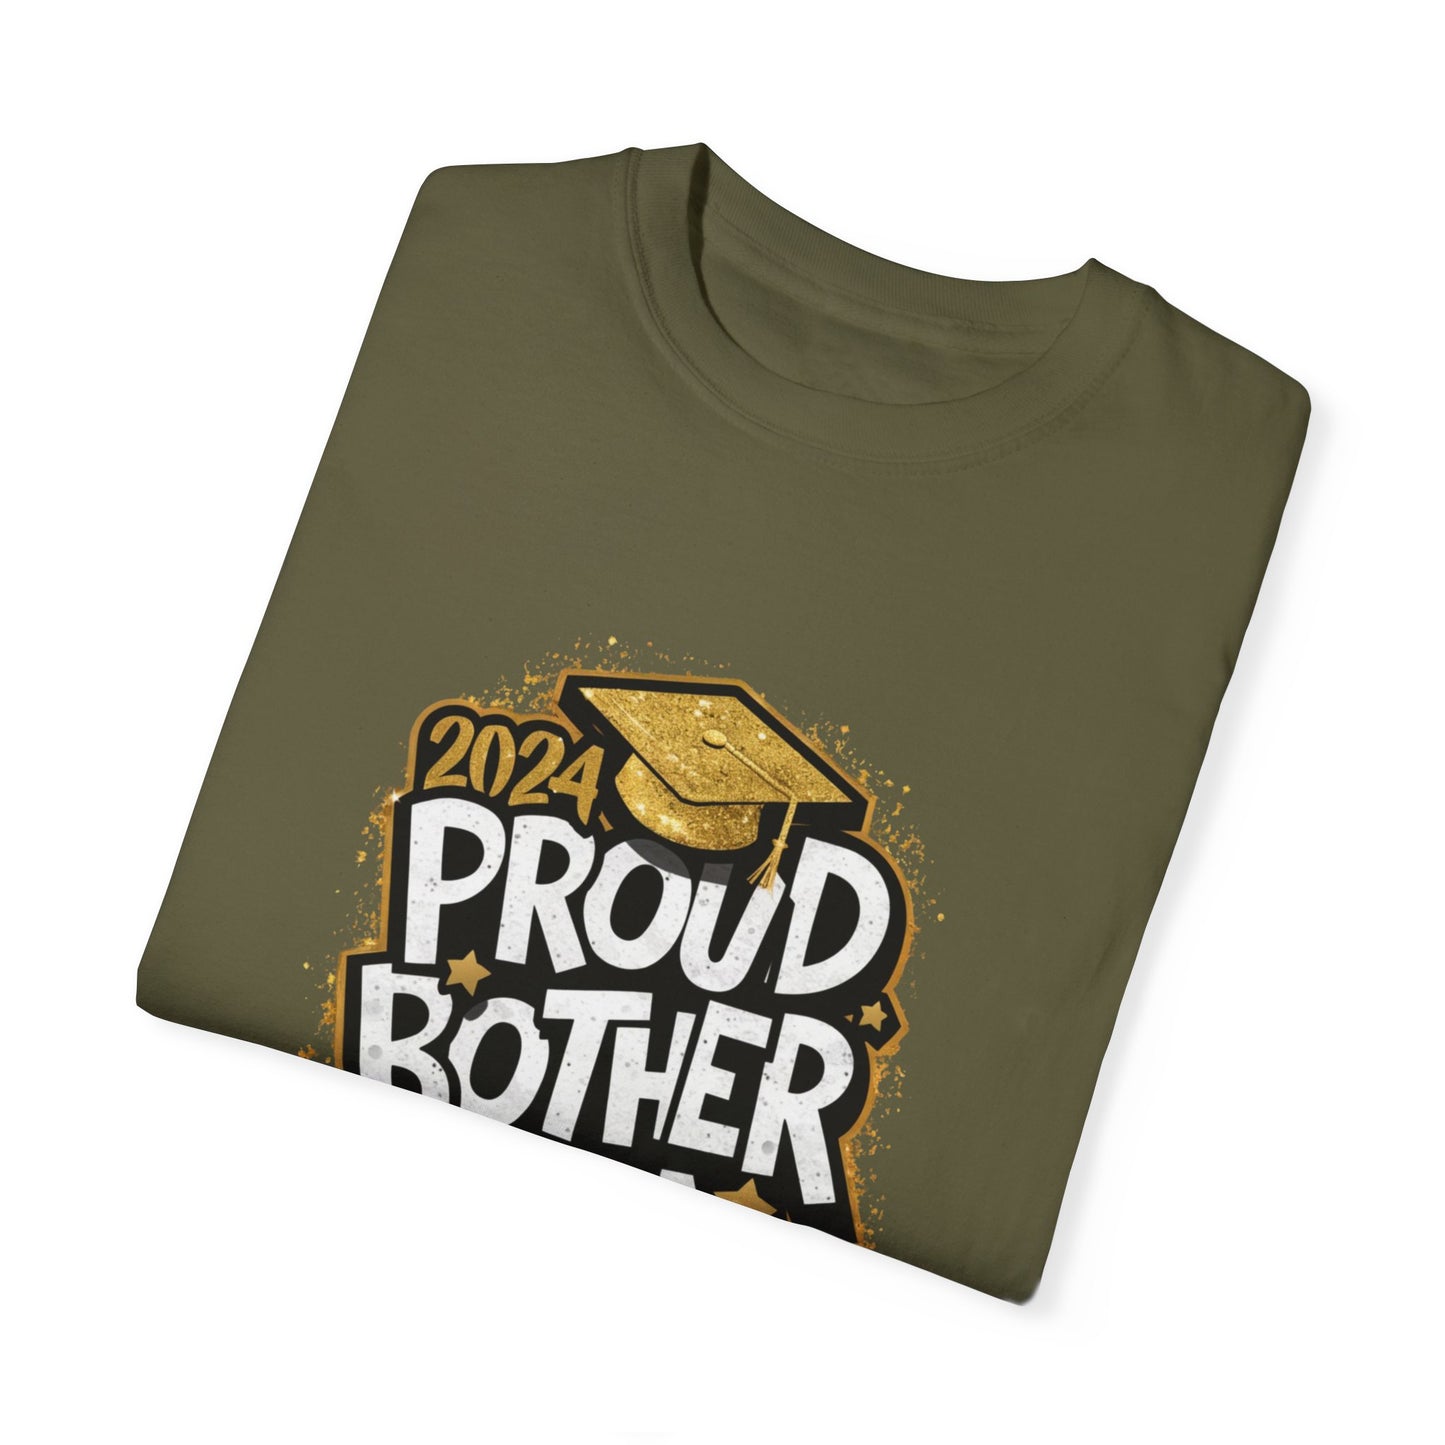 Proud Brother of a 2024 Graduate Unisex Garment-dyed T-shirt Cotton Funny Humorous Graphic Soft Premium Unisex Men Women Sage T-shirt Birthday Gift-53